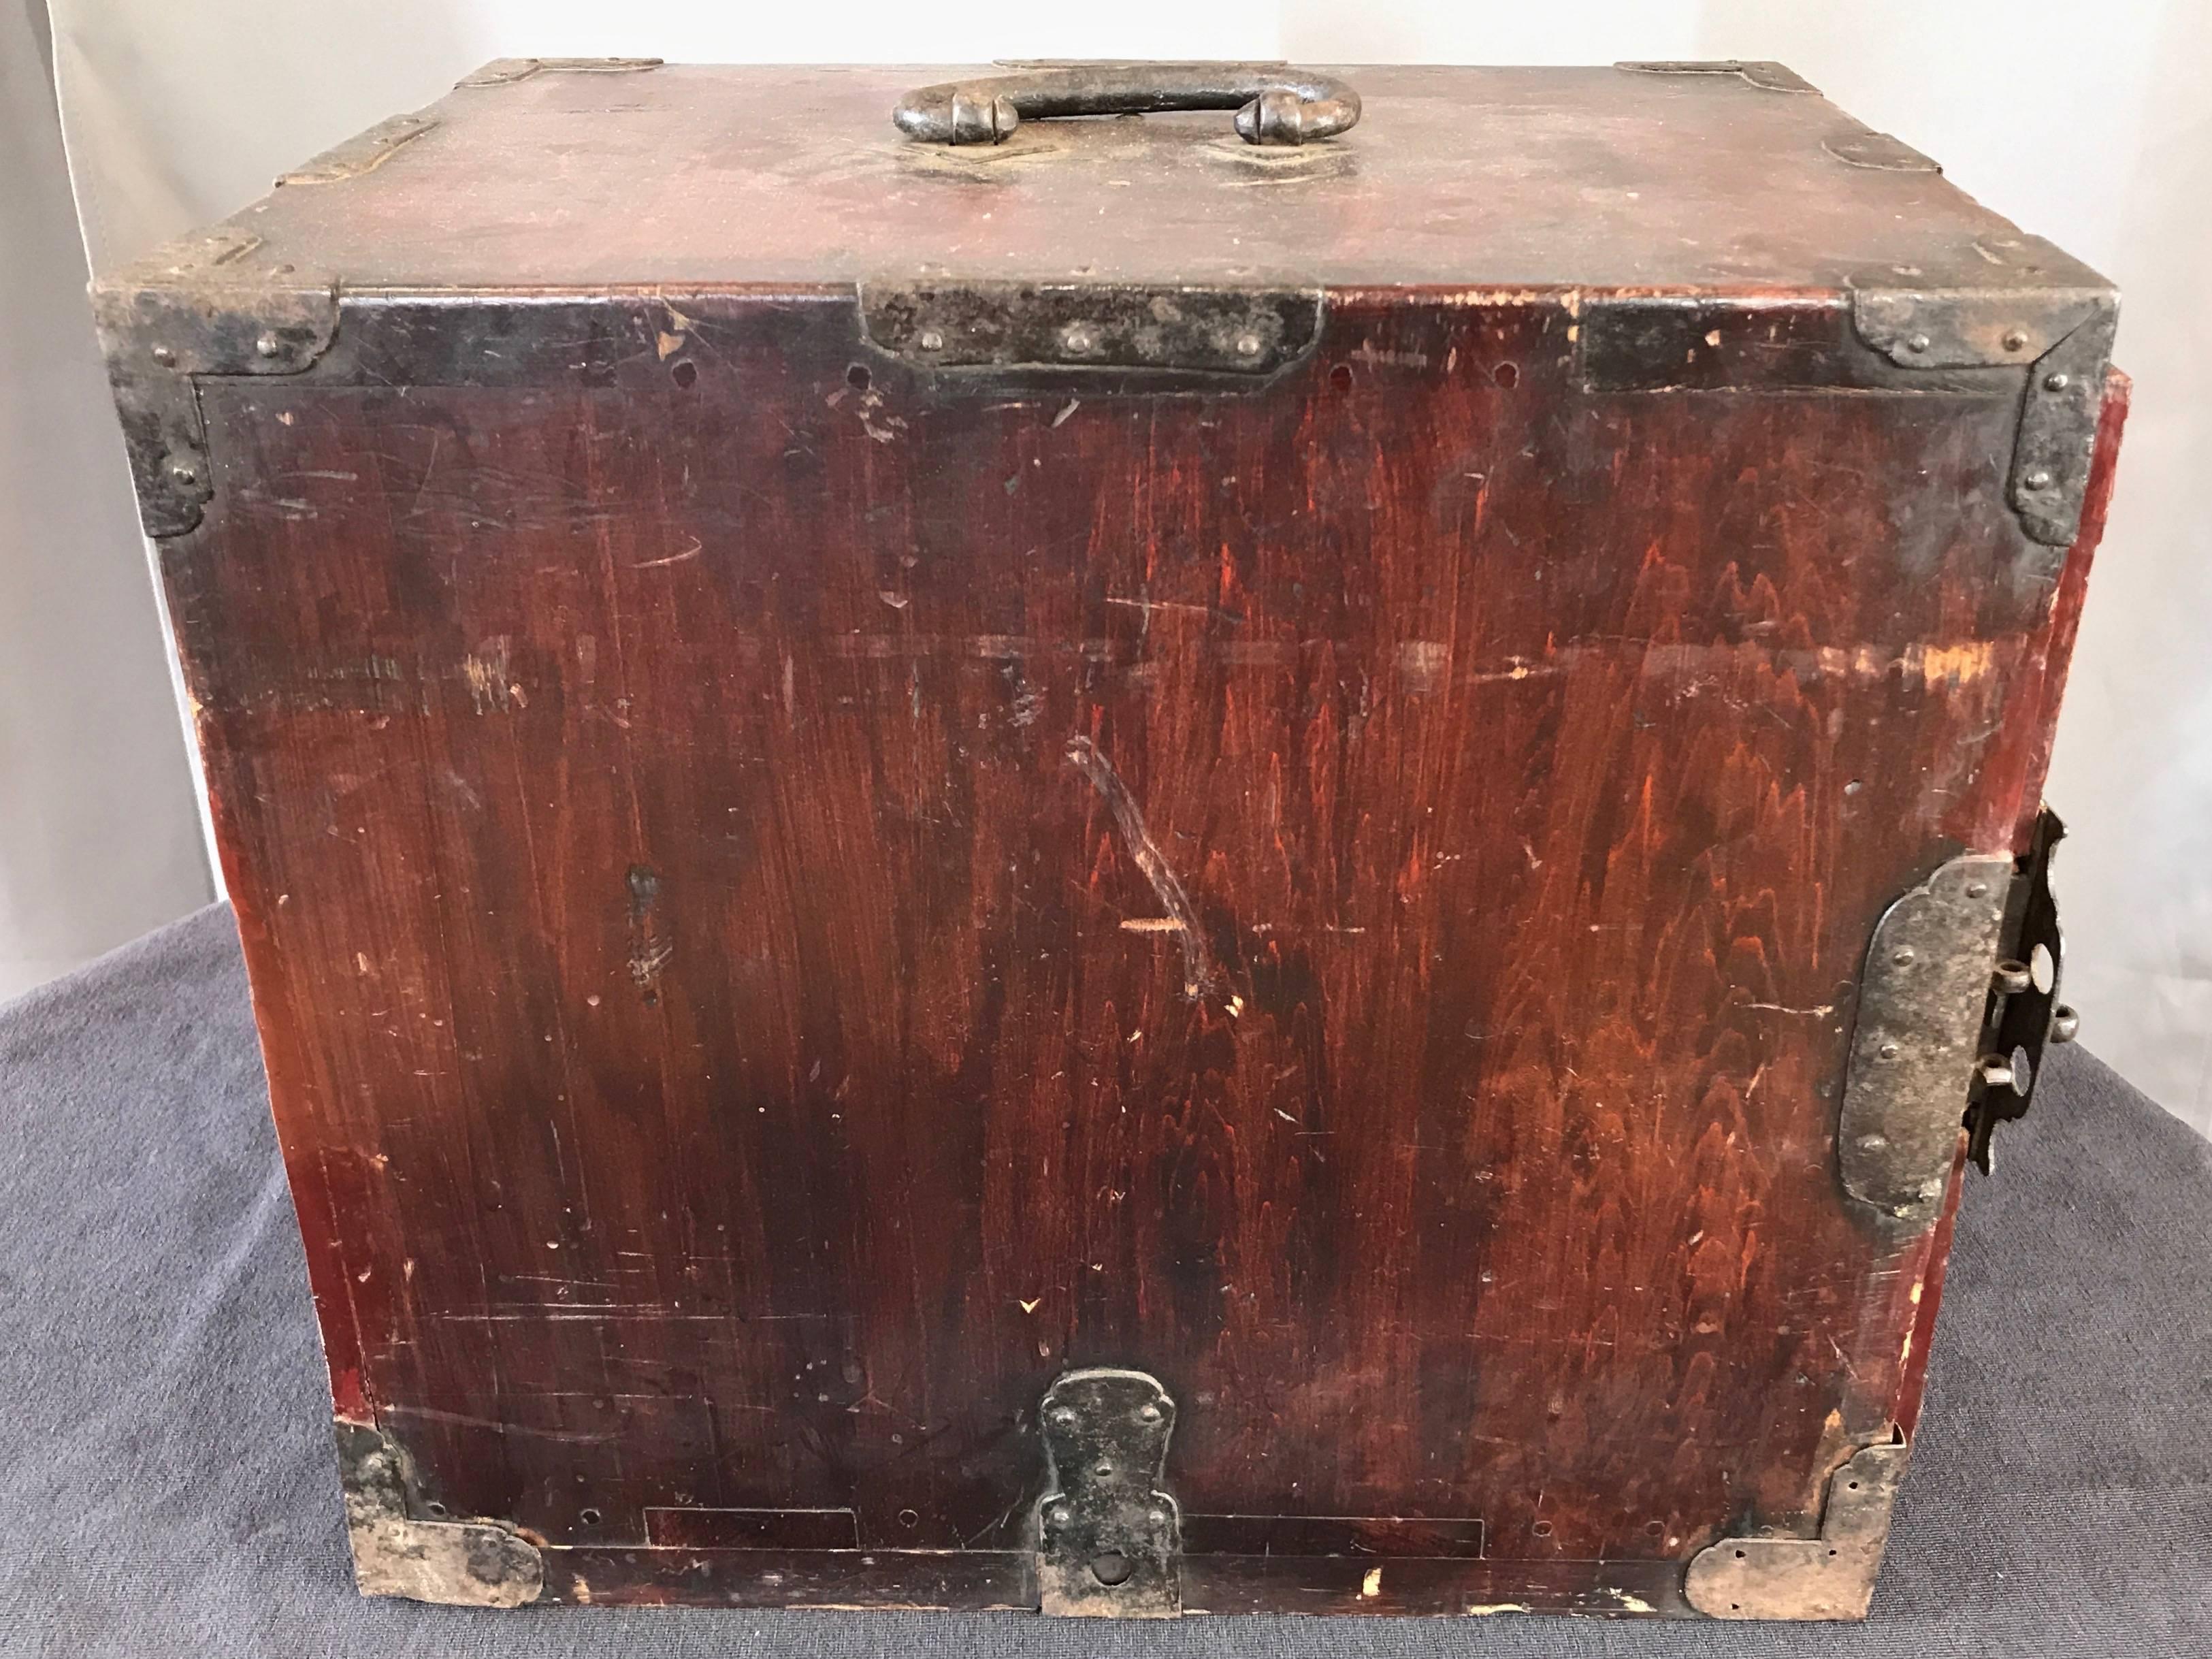 Early 20th Century Antique Compact Chinese Seaman’s Chest with Locks and Key